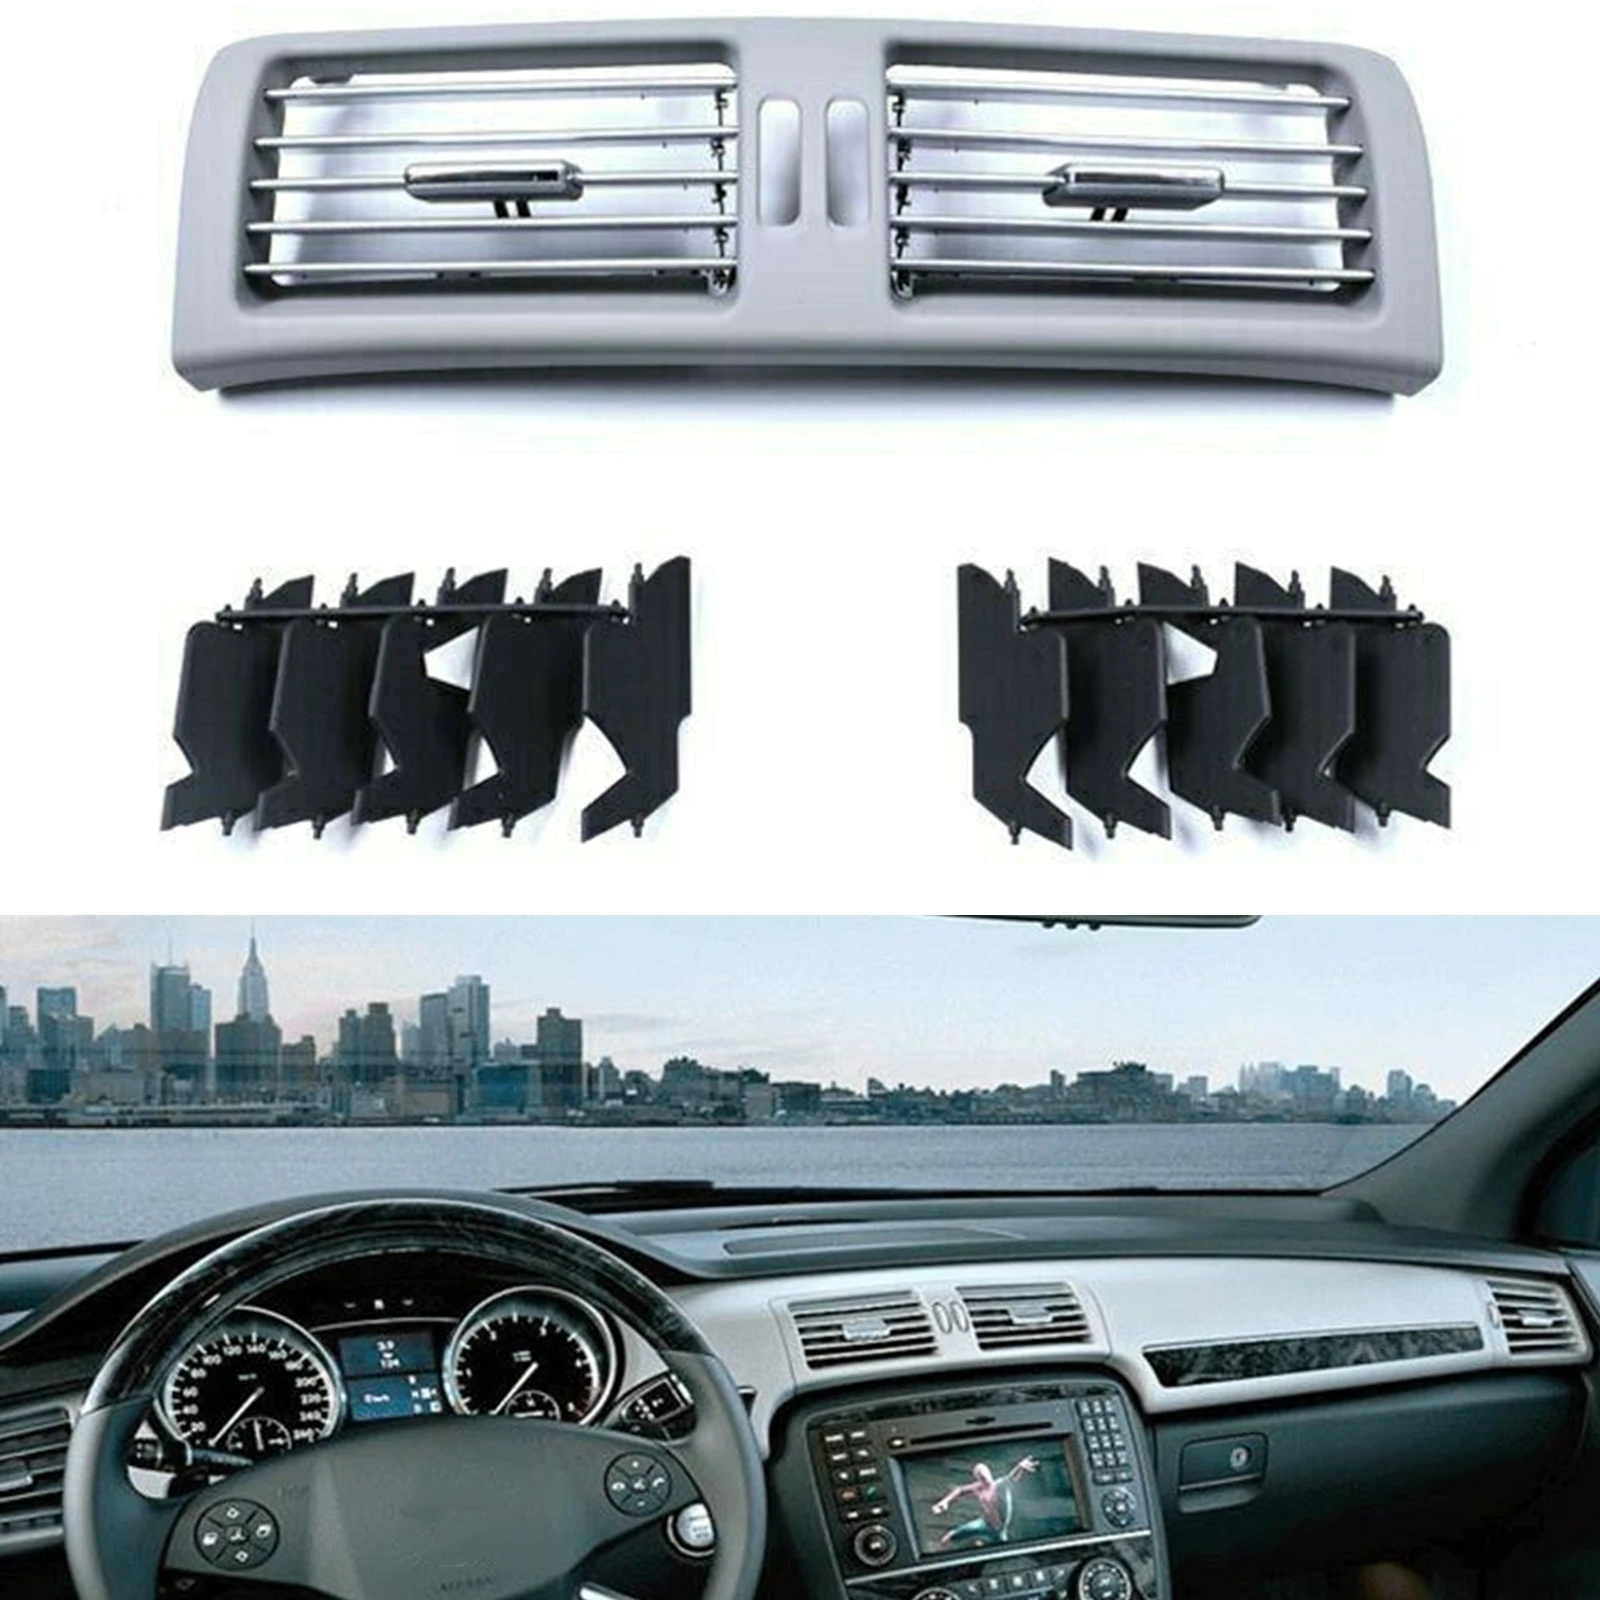 

A/C Center Air Outlet Vent Conditioning Panel Grille Cover For Mercedes-Benz R Class W251 R300 R320 R350 R400 R500 2006-2009